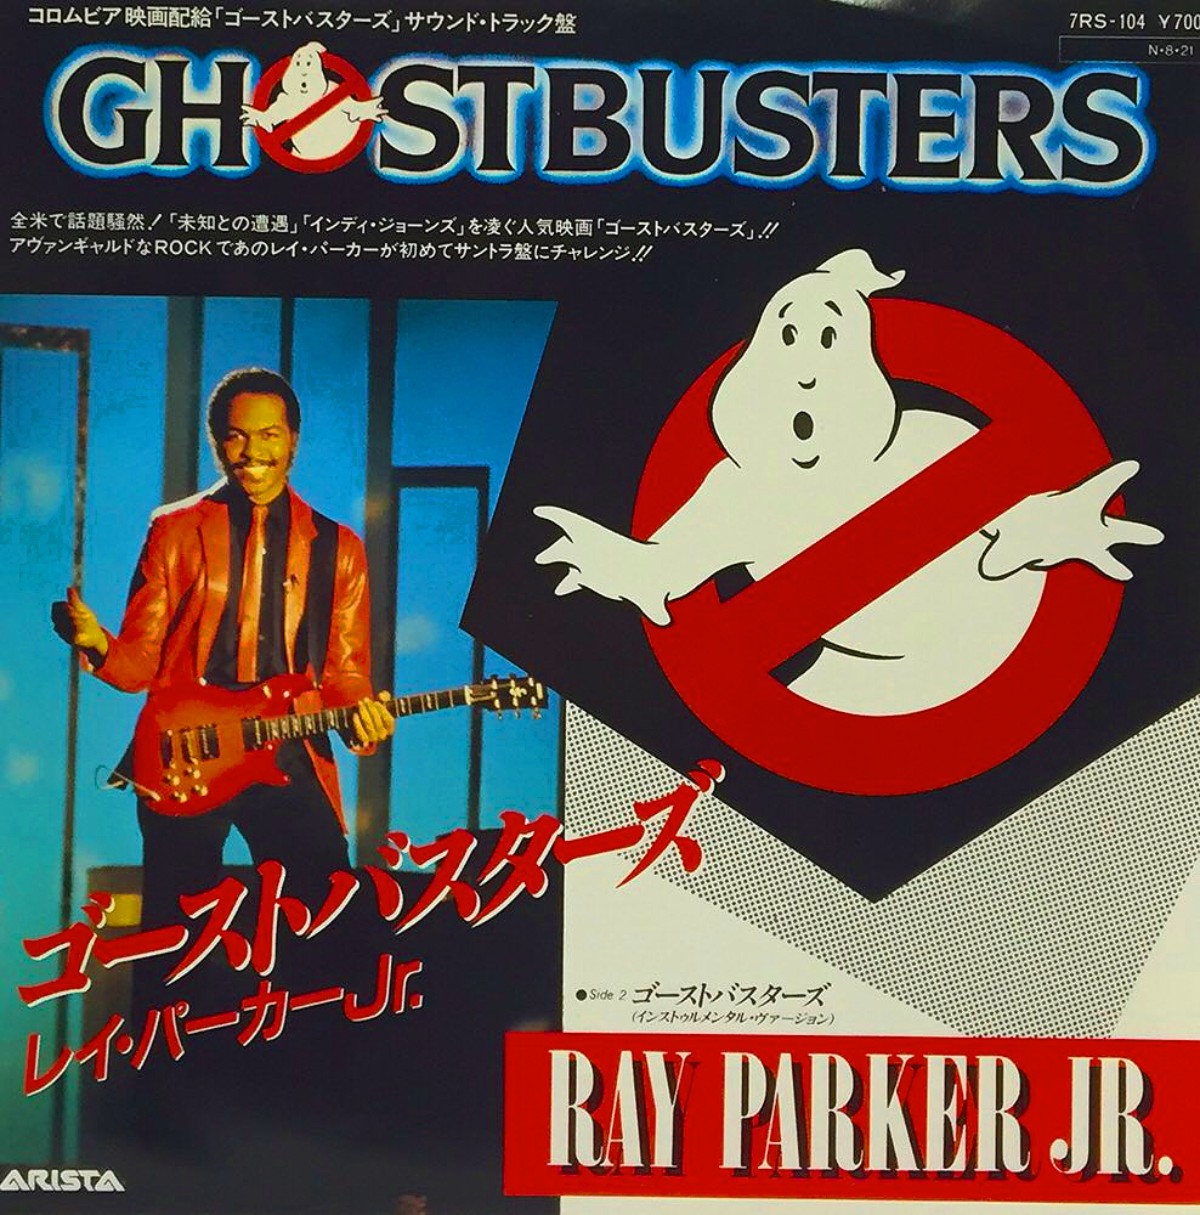 Ghostbusters (1984) - Ray Parker JR - Einzelcover